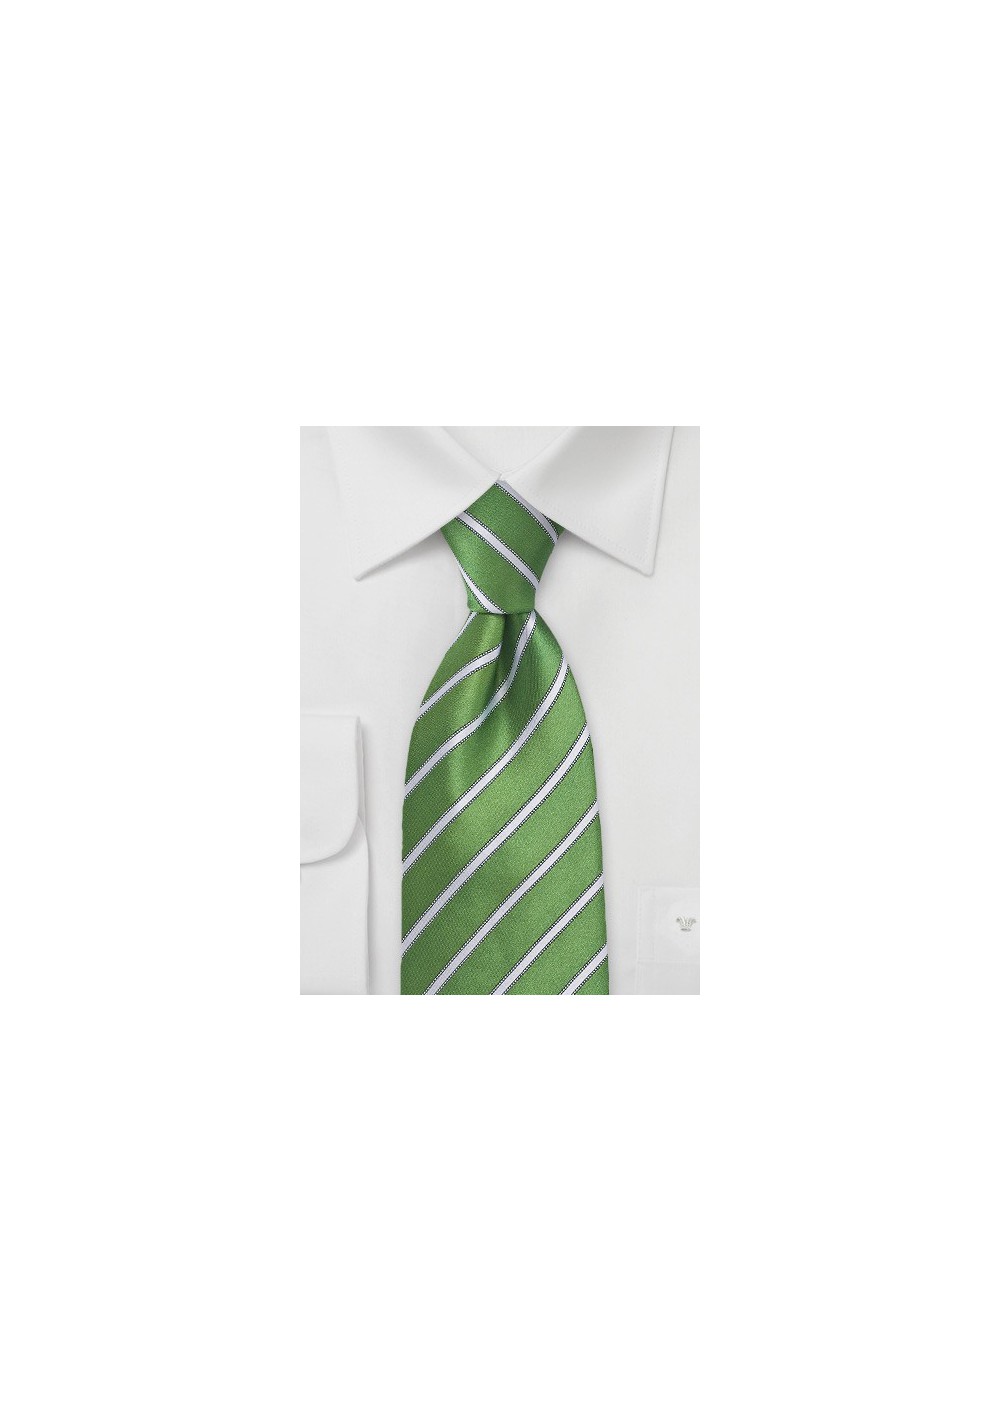 Organic Green and White Striped Tie in Kids Size